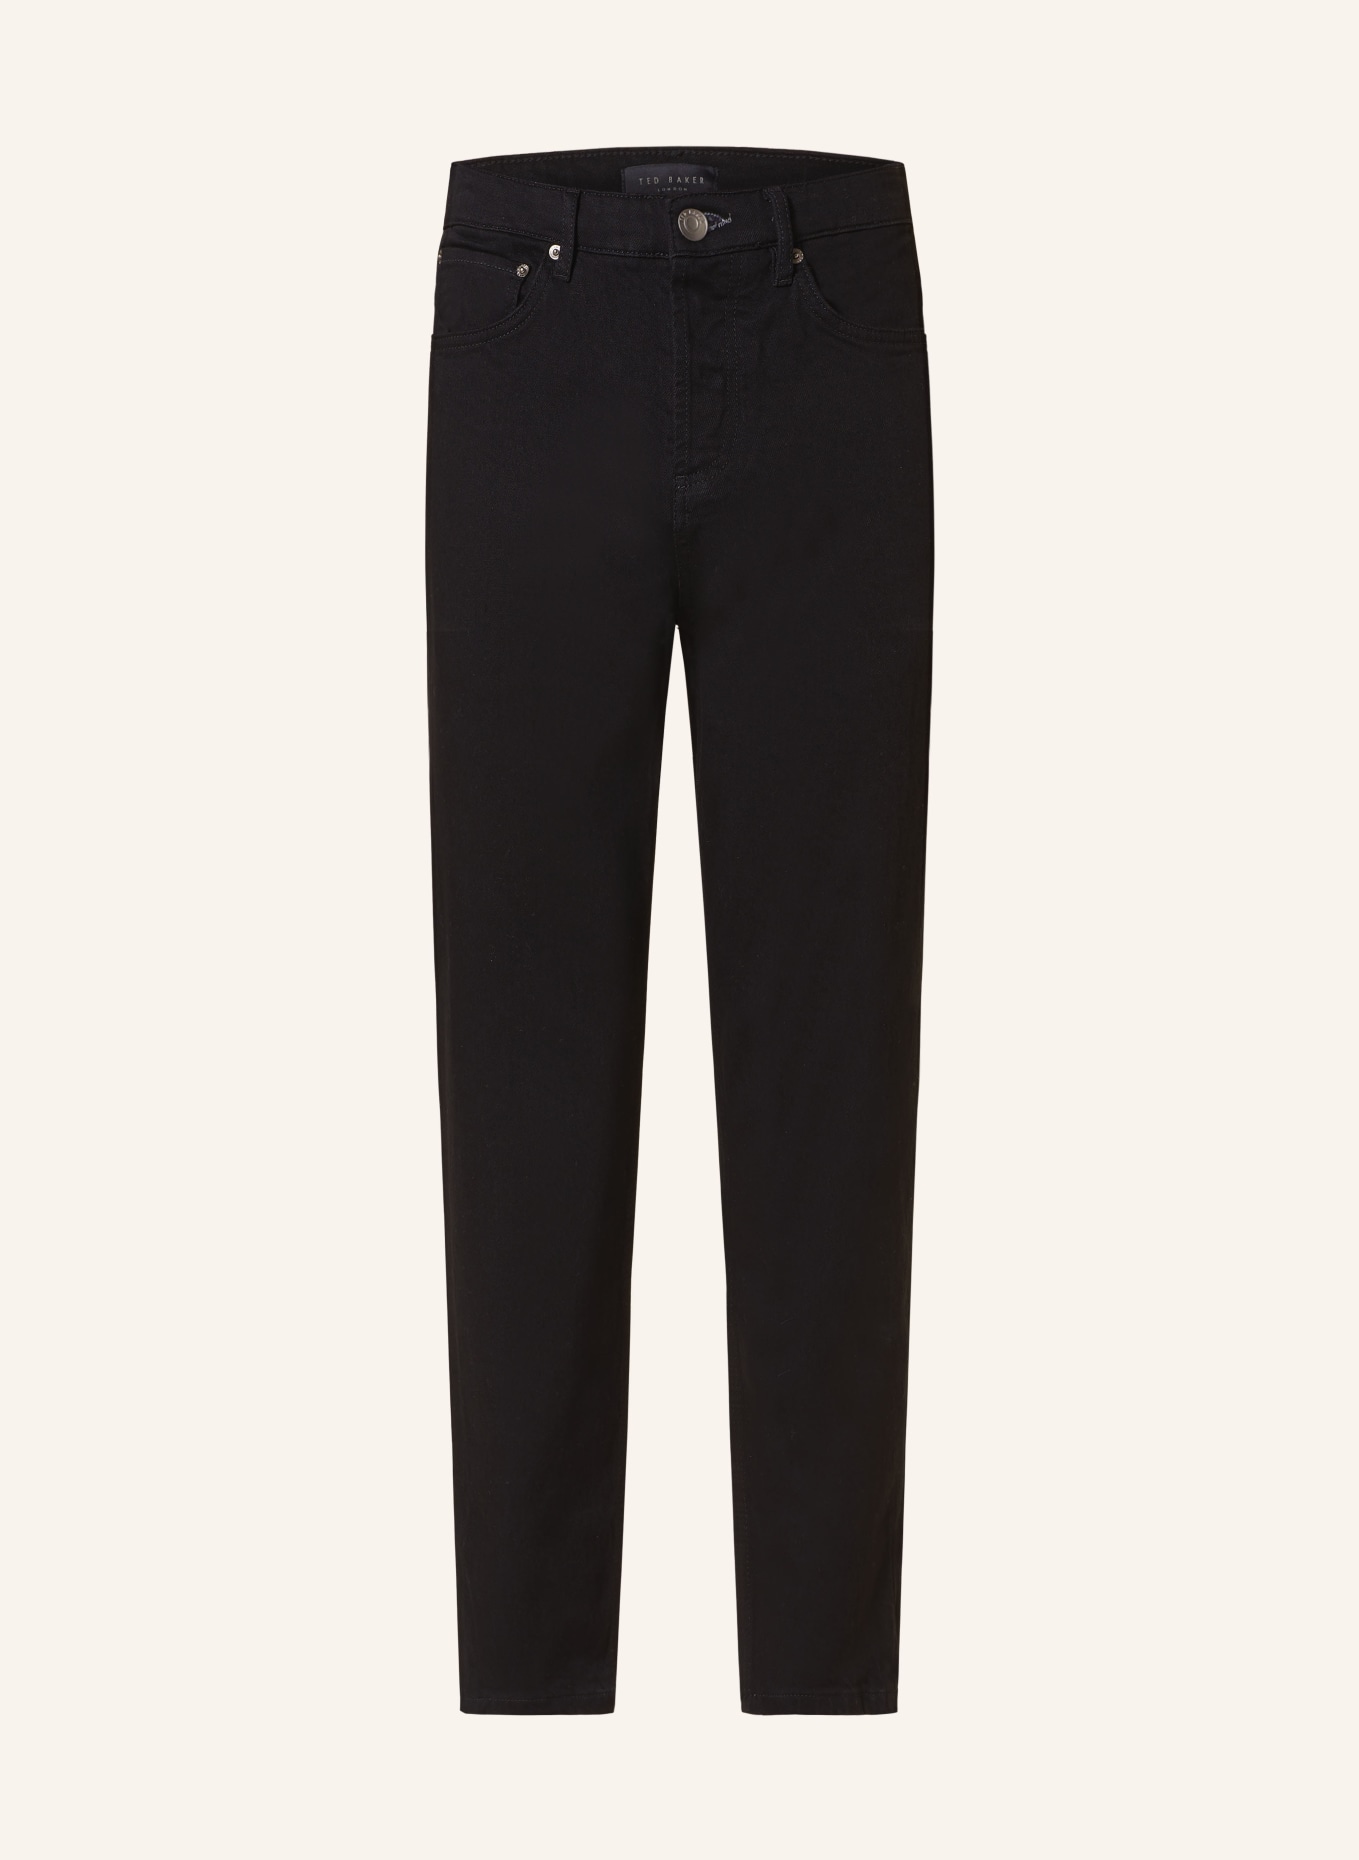 TED BAKER Jeans DYLLON Tapered Fit, Farbe: SCHWARZ (Bild 1)